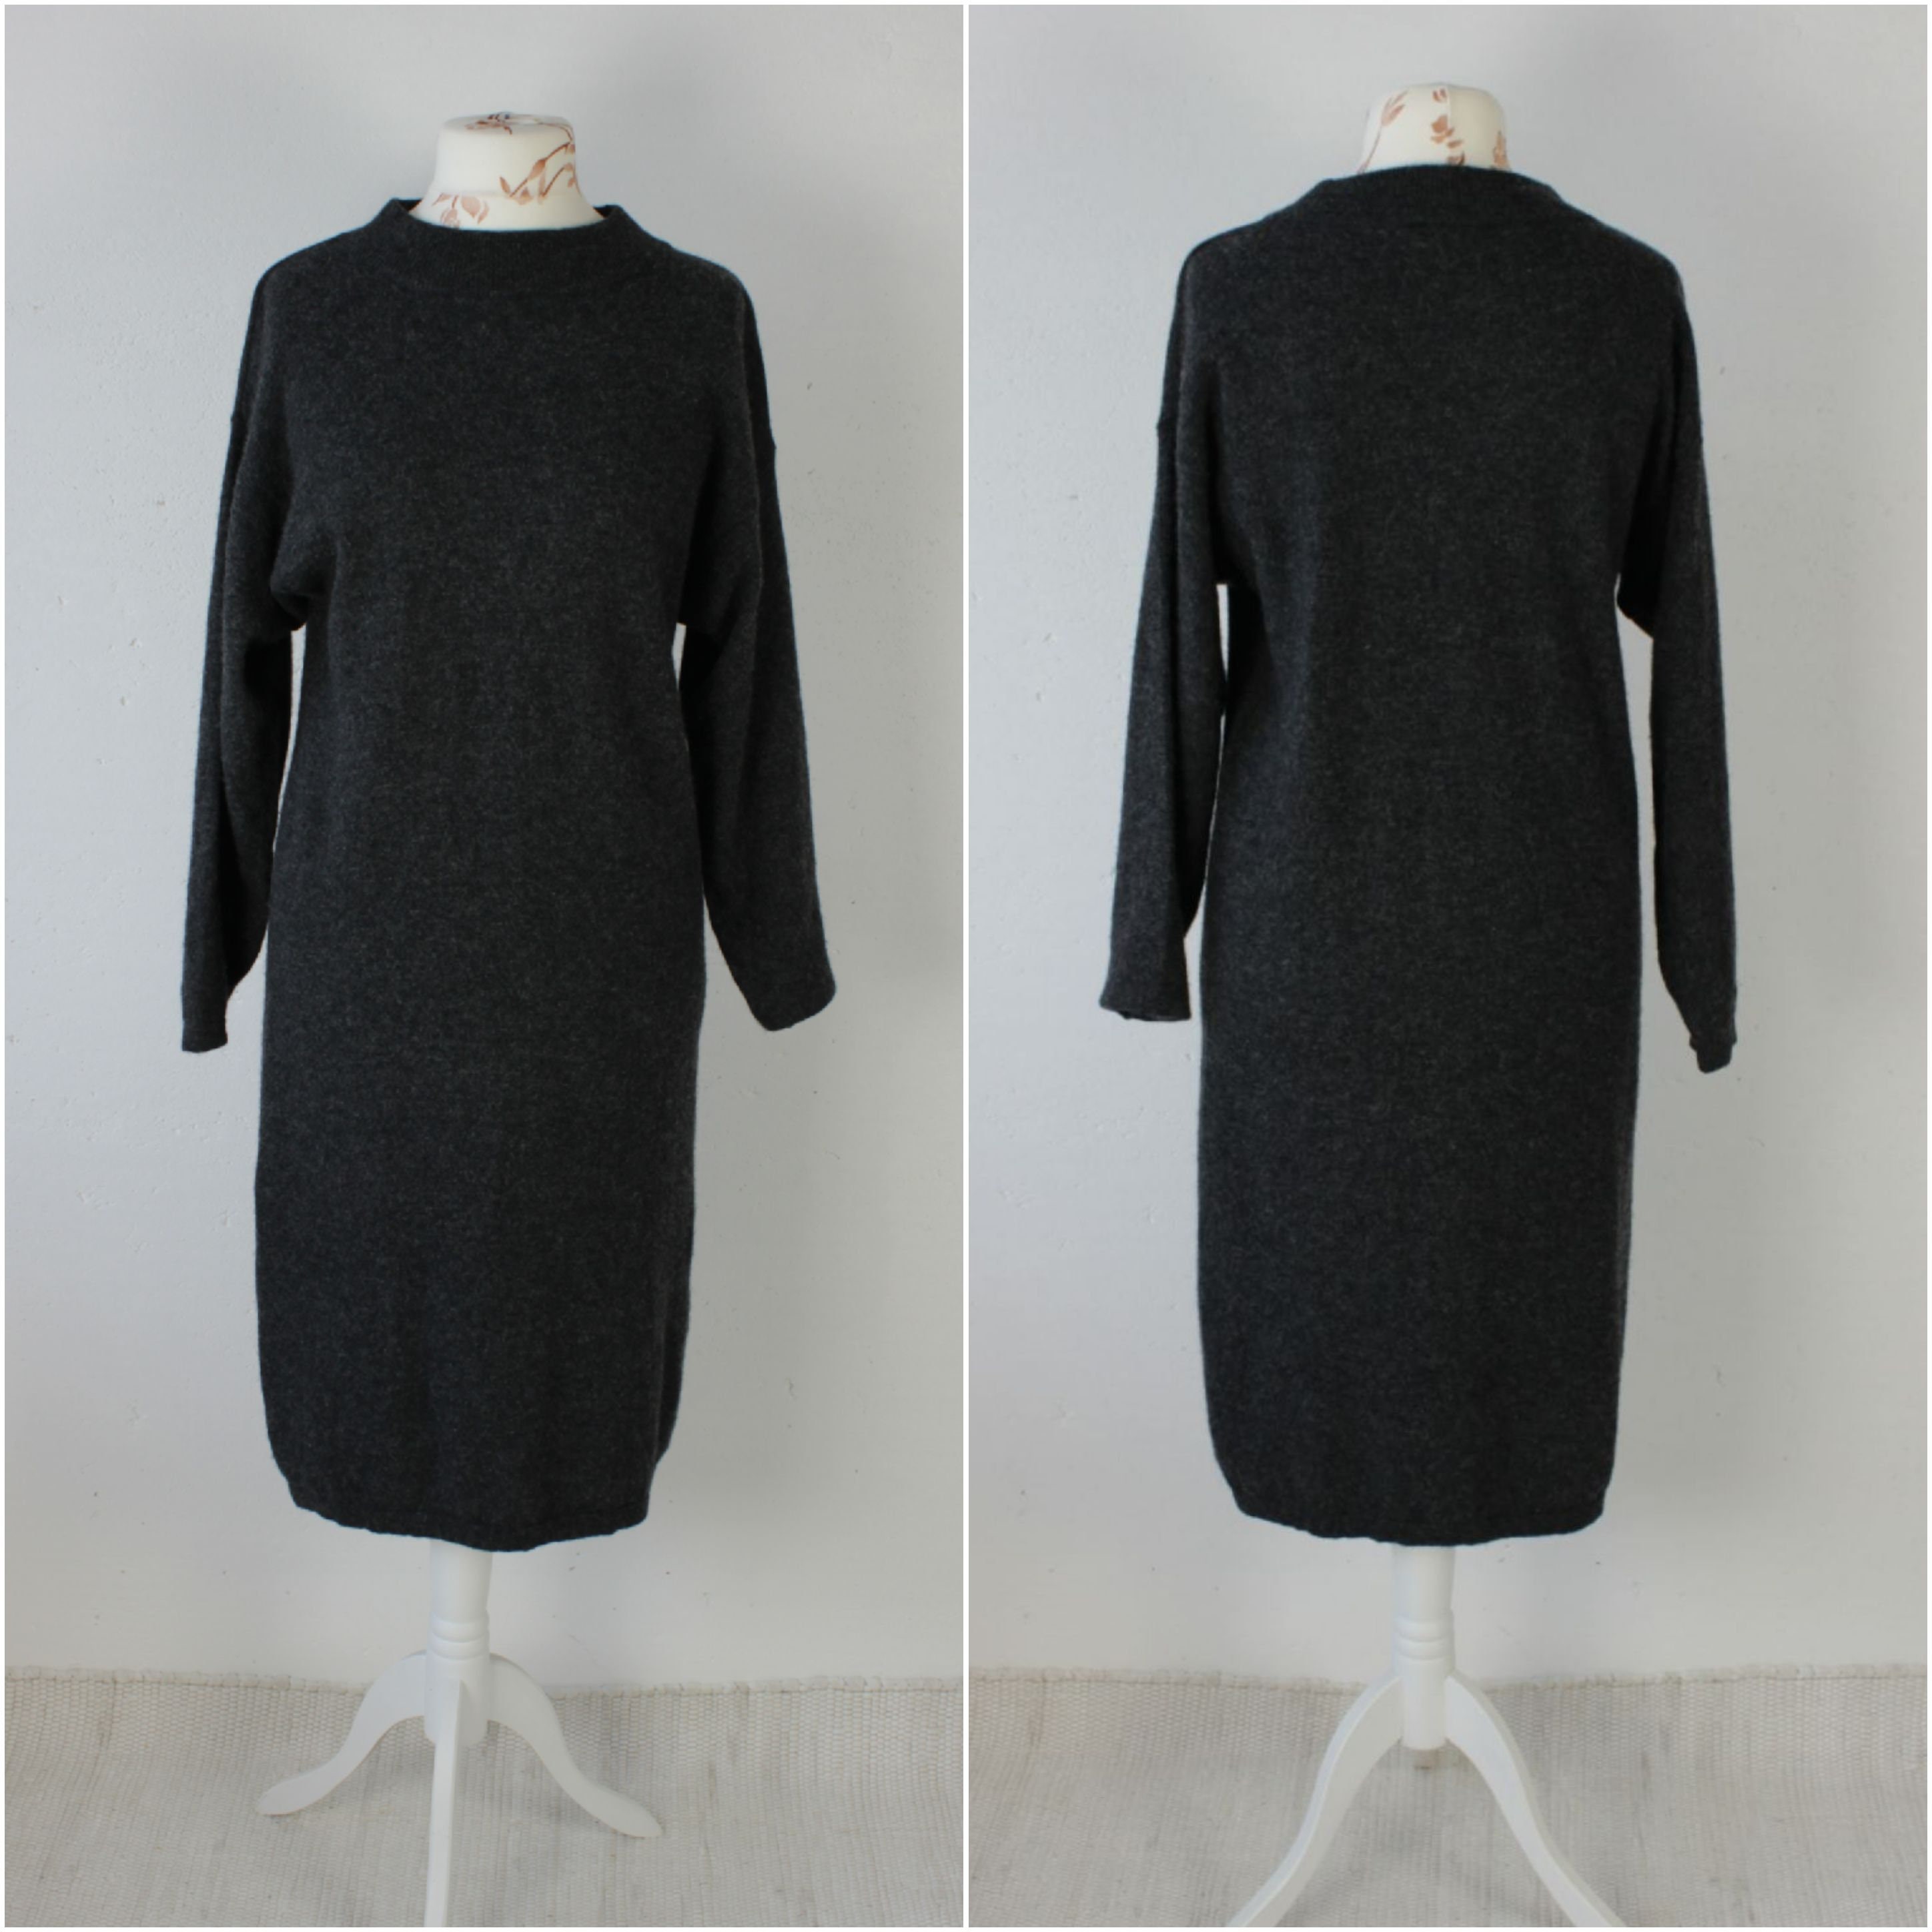 Vintage Dark Grey Knitted Wool Blend Women's Dress Simple Basic Knit Below The Knee Length With Long Sleeve & Crew Neck L Large Size